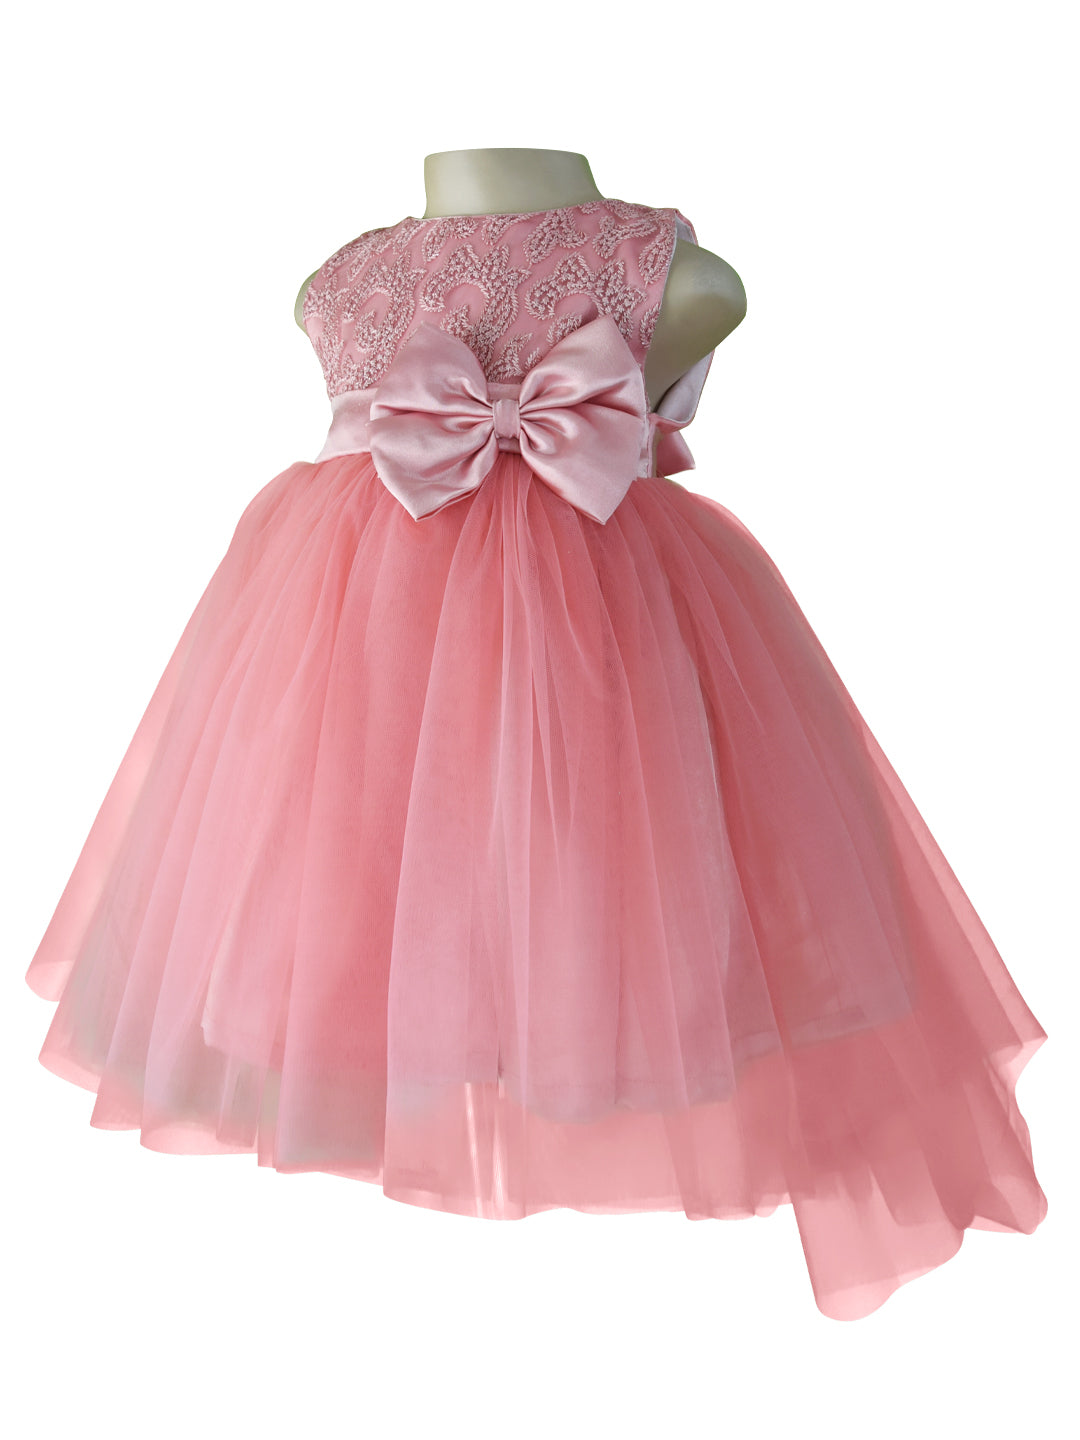 Floral Lace Floral Infant Dress Princess Style Infant Party Gown For Baby  Shower And Summer DHW3930 From Toddlerlife, $6.05 | DHgate.Com